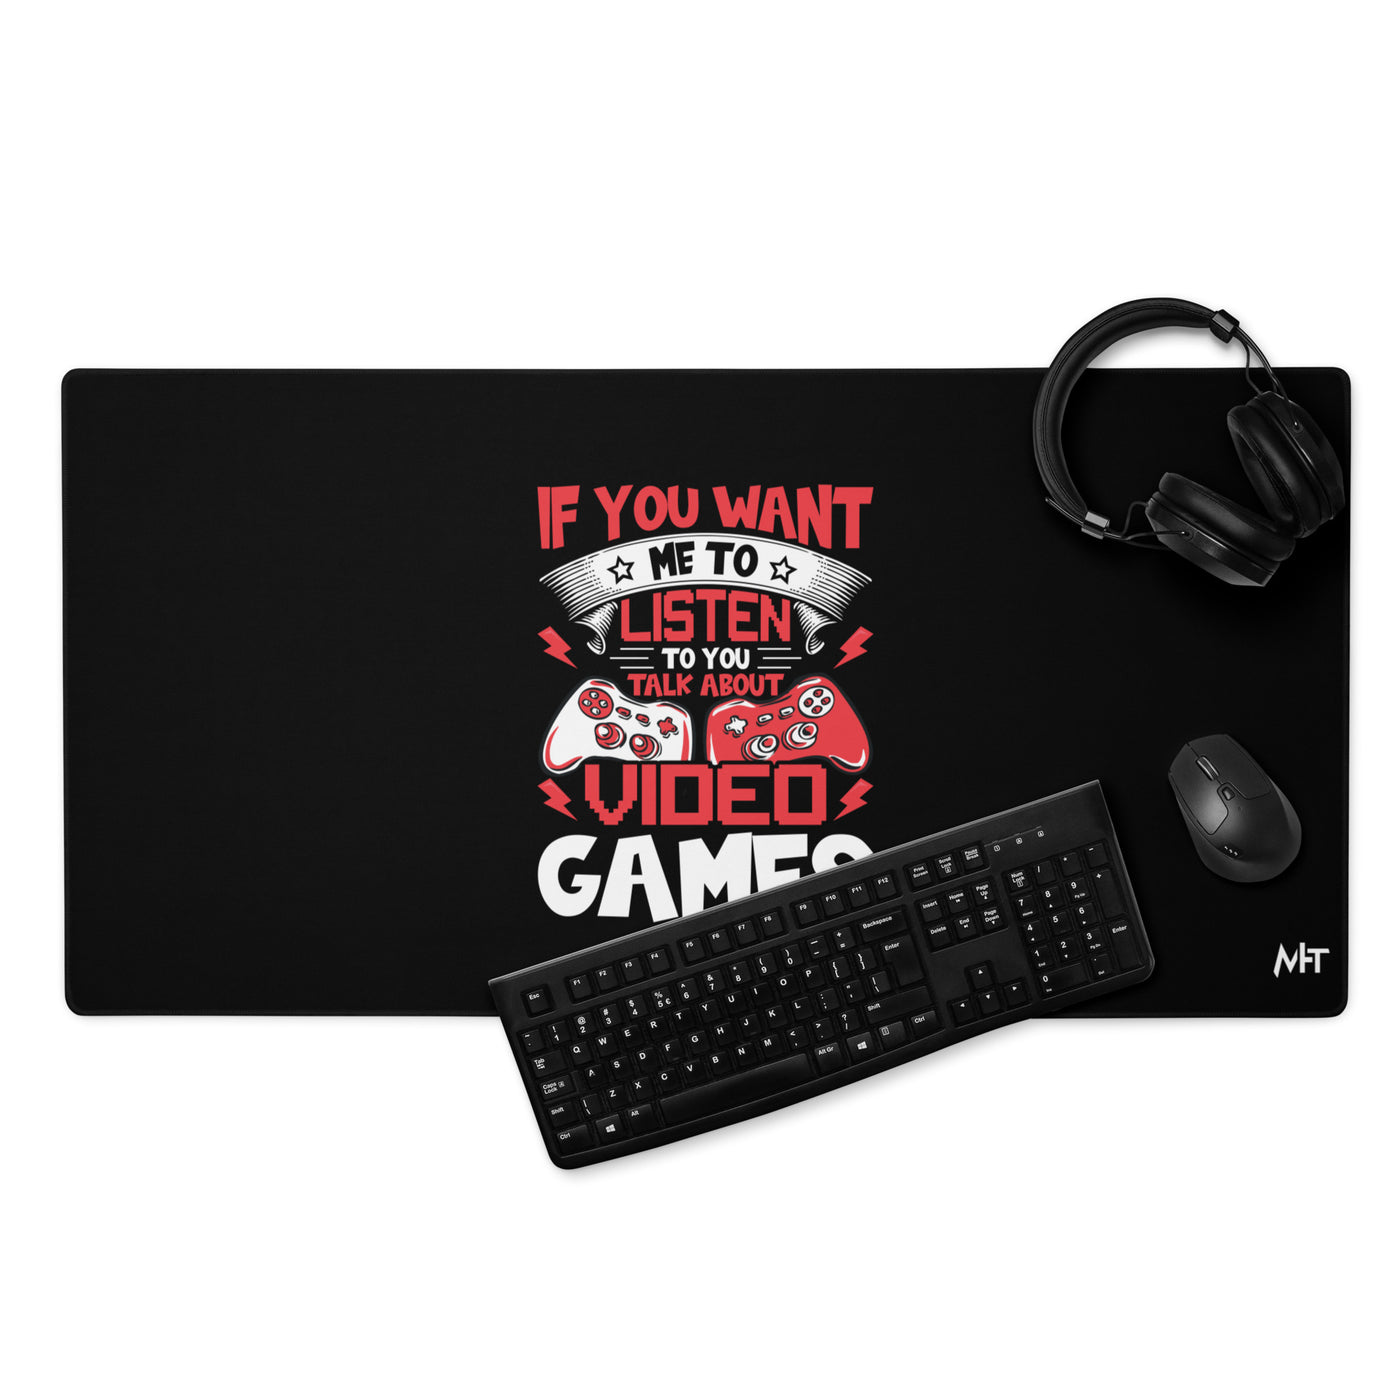 If you Want me to listen to you Talk about Video Games - Desk Mat